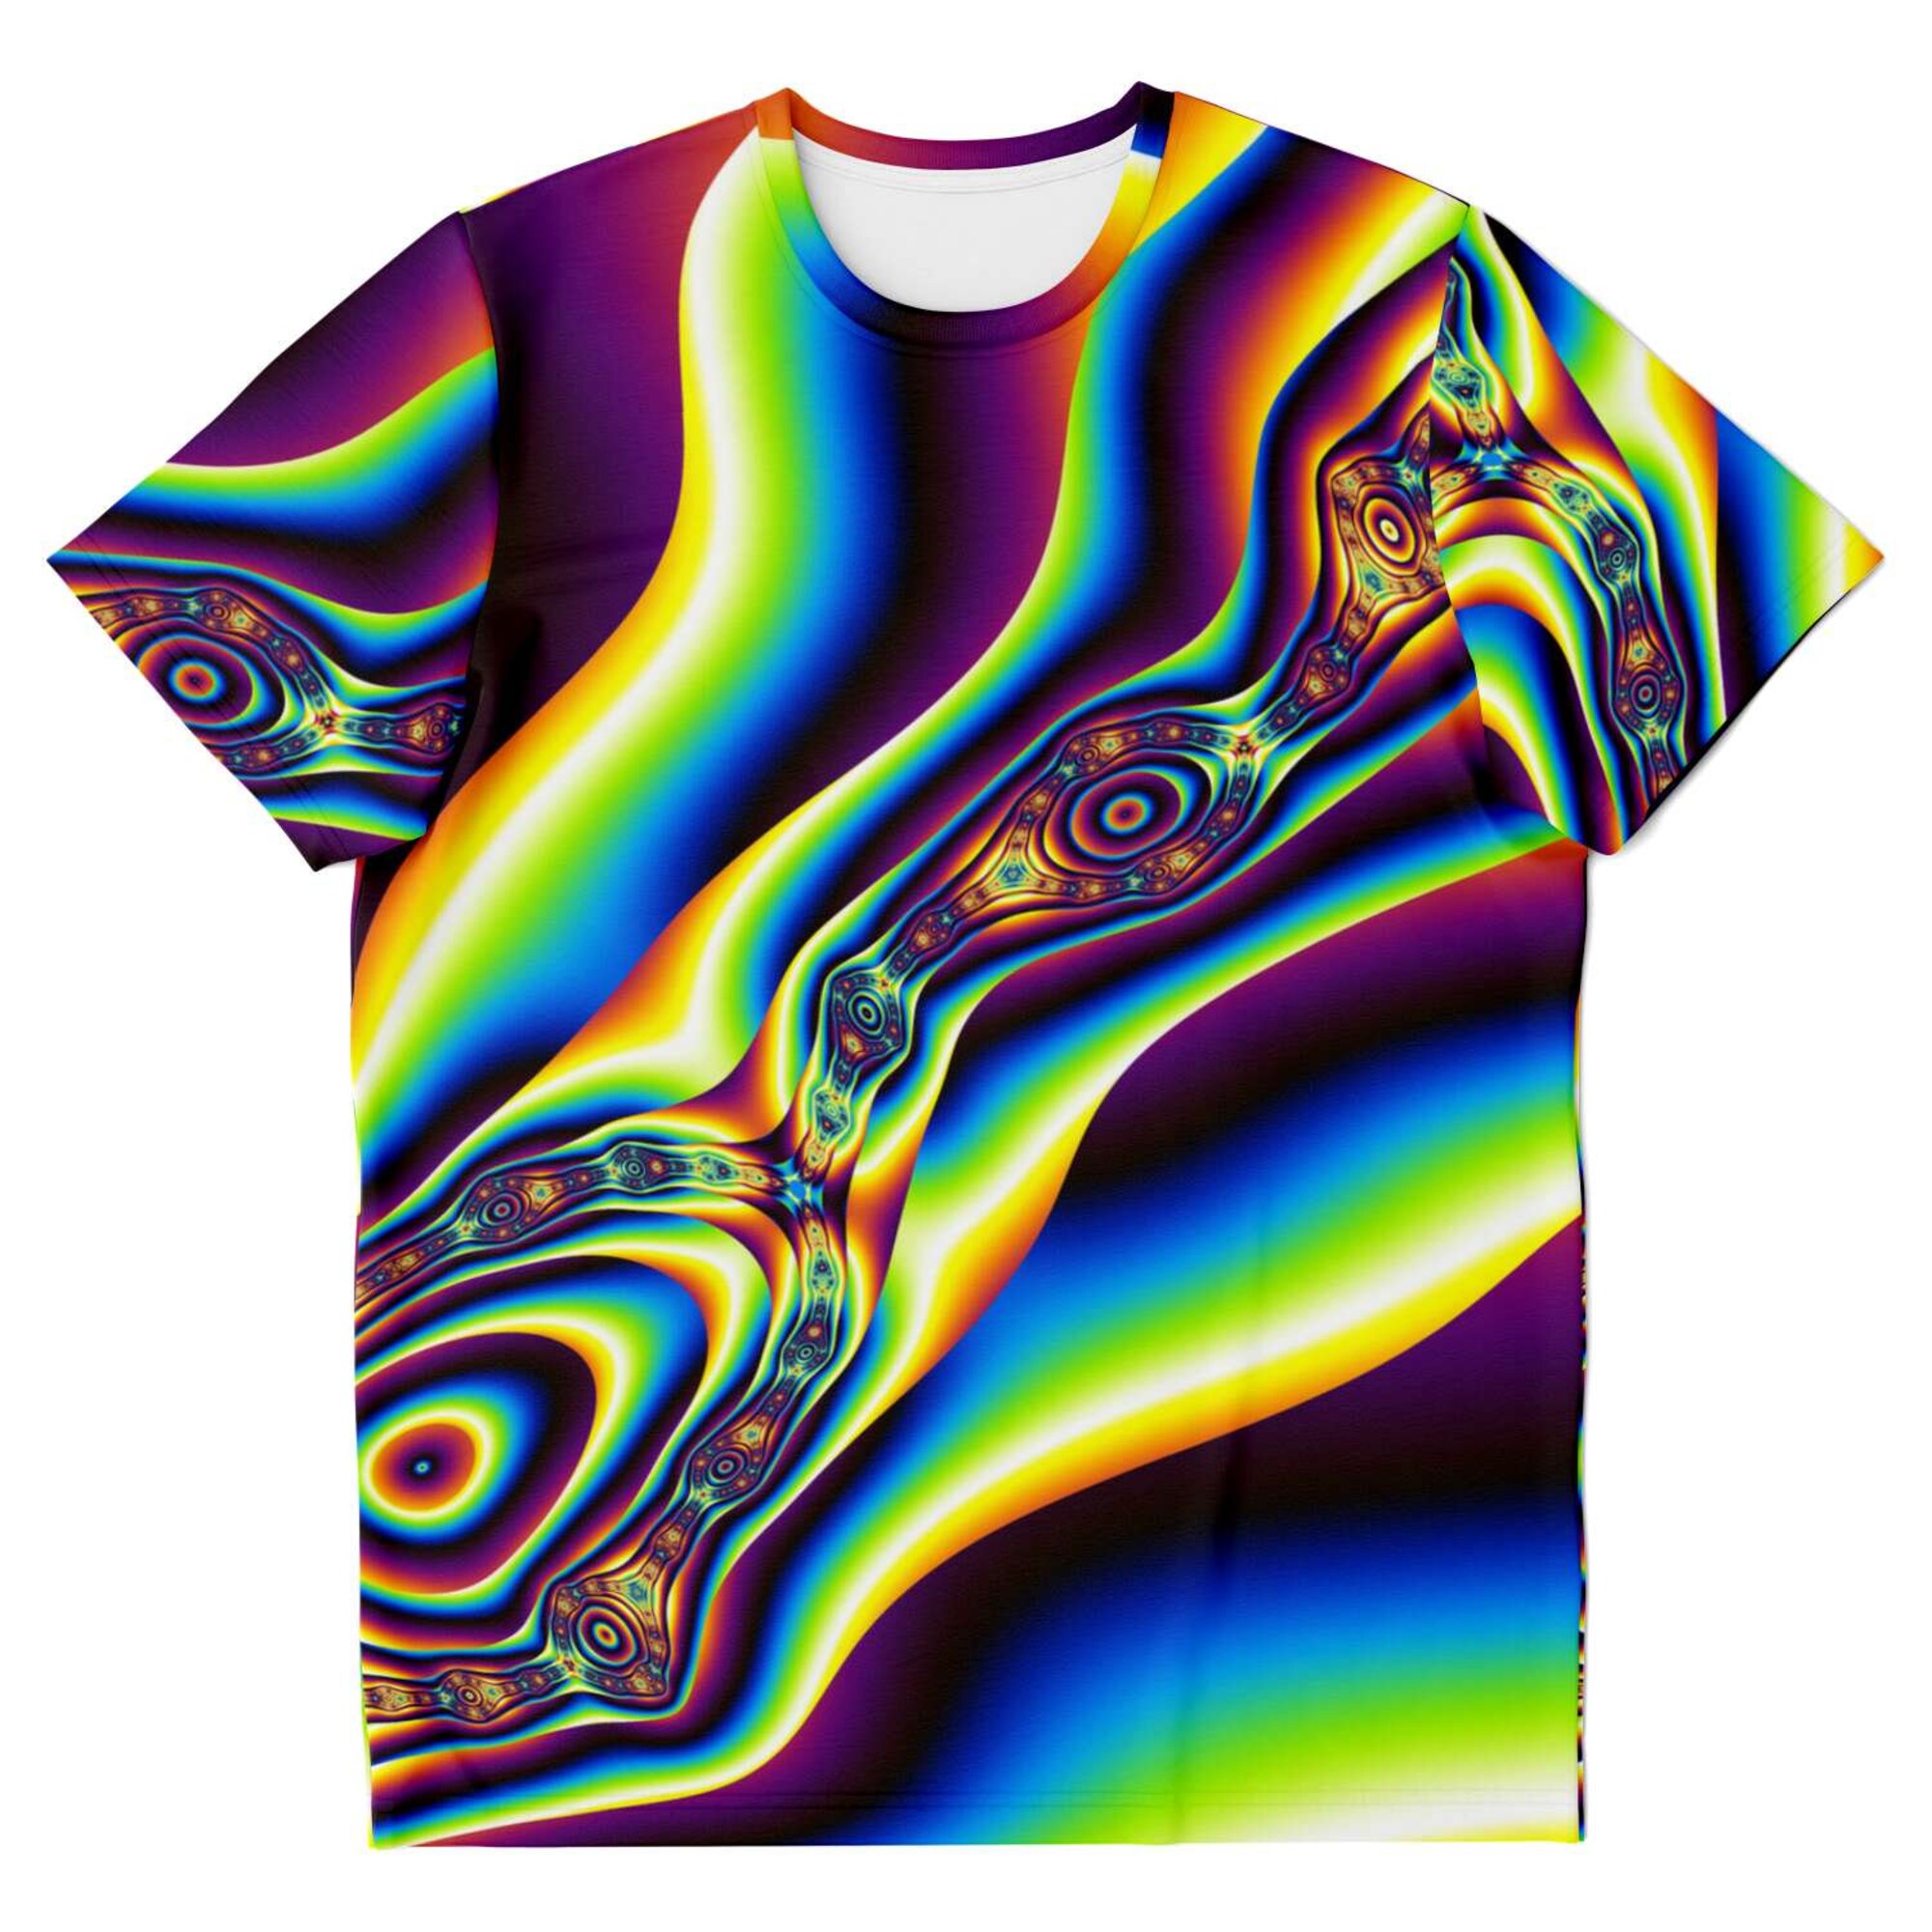 Discover Psychedelic Fractals Dmt Lsd Abstract Cells 3D T Shirt